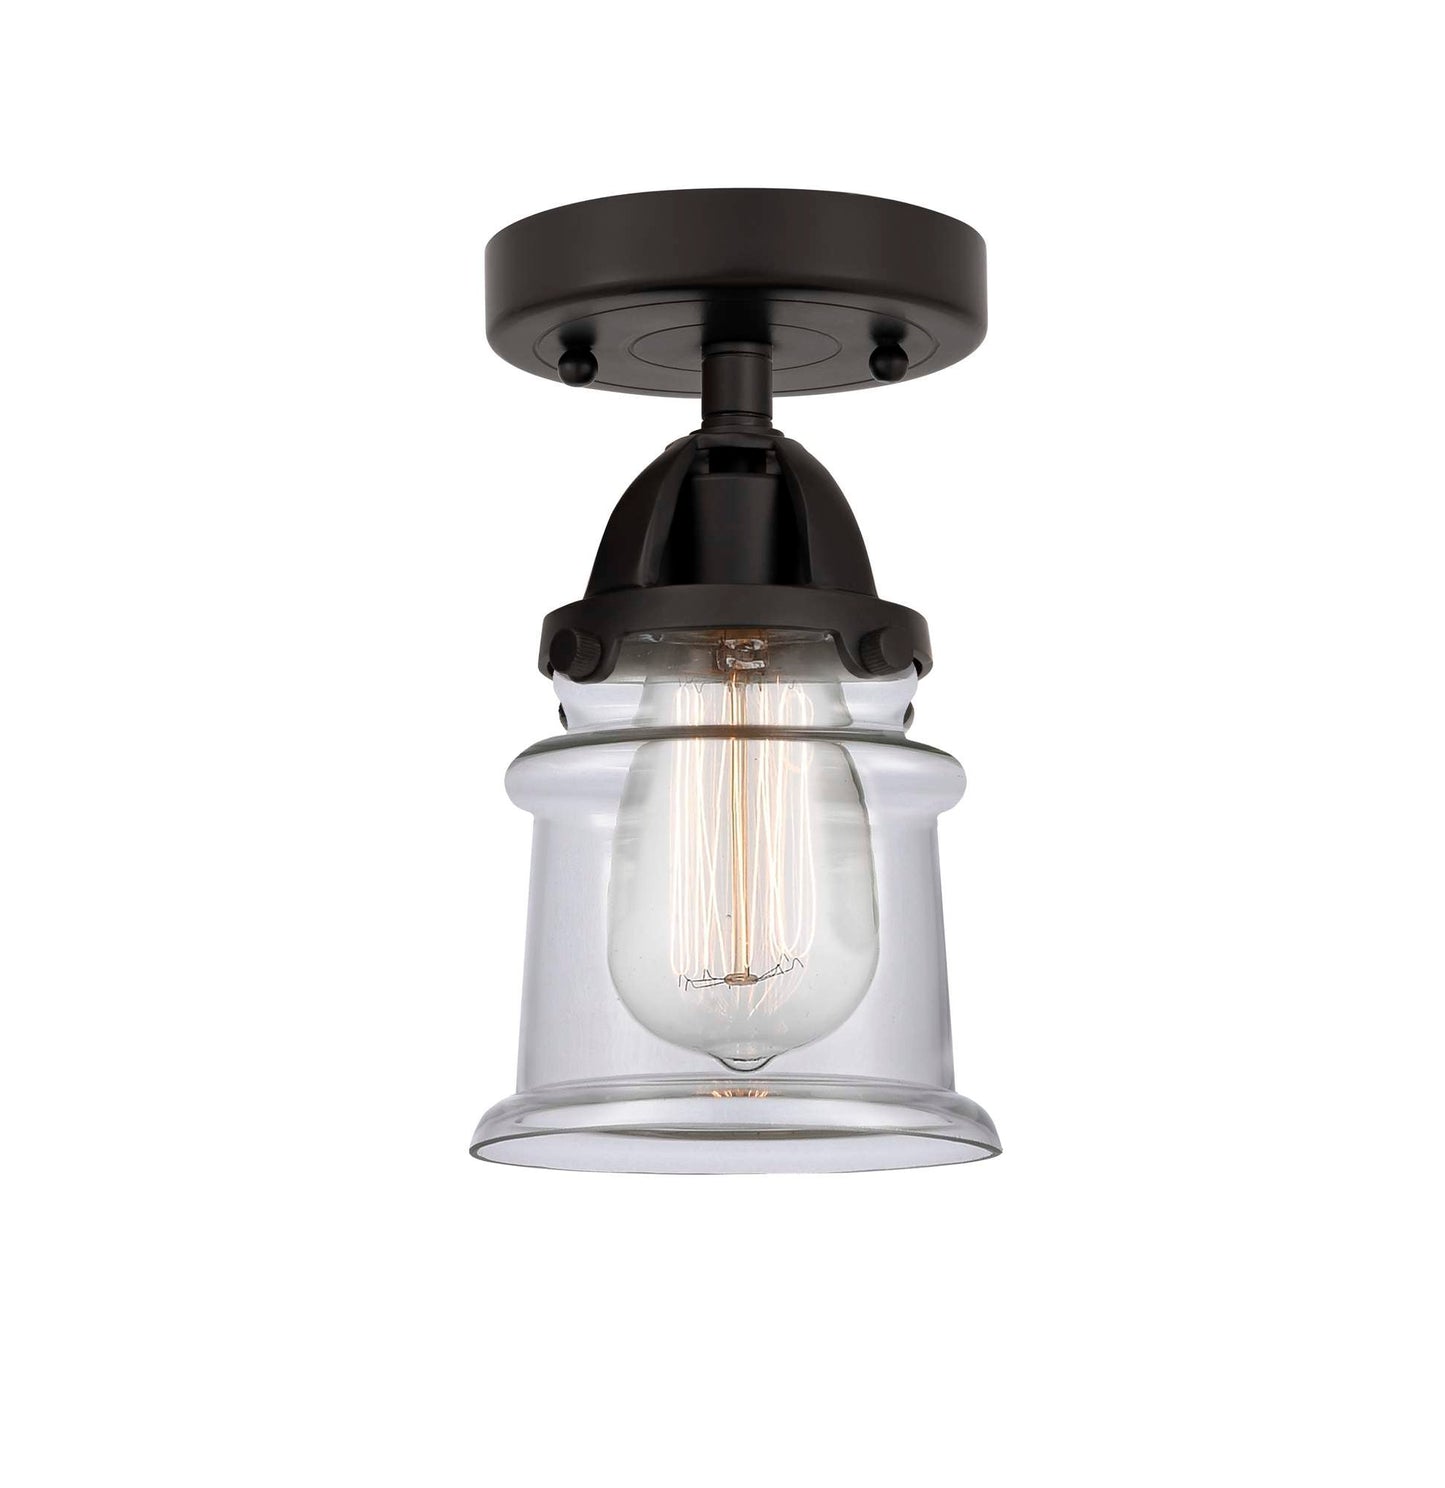 288-1C-BK-G182S 1-Light 5.25" Matte Black Semi-Flush Mount - Clear Small Canton Glass - LED Bulb - Dimmensions: 5.25 x 5.25 x 9 - Sloped Ceiling Compatible: No